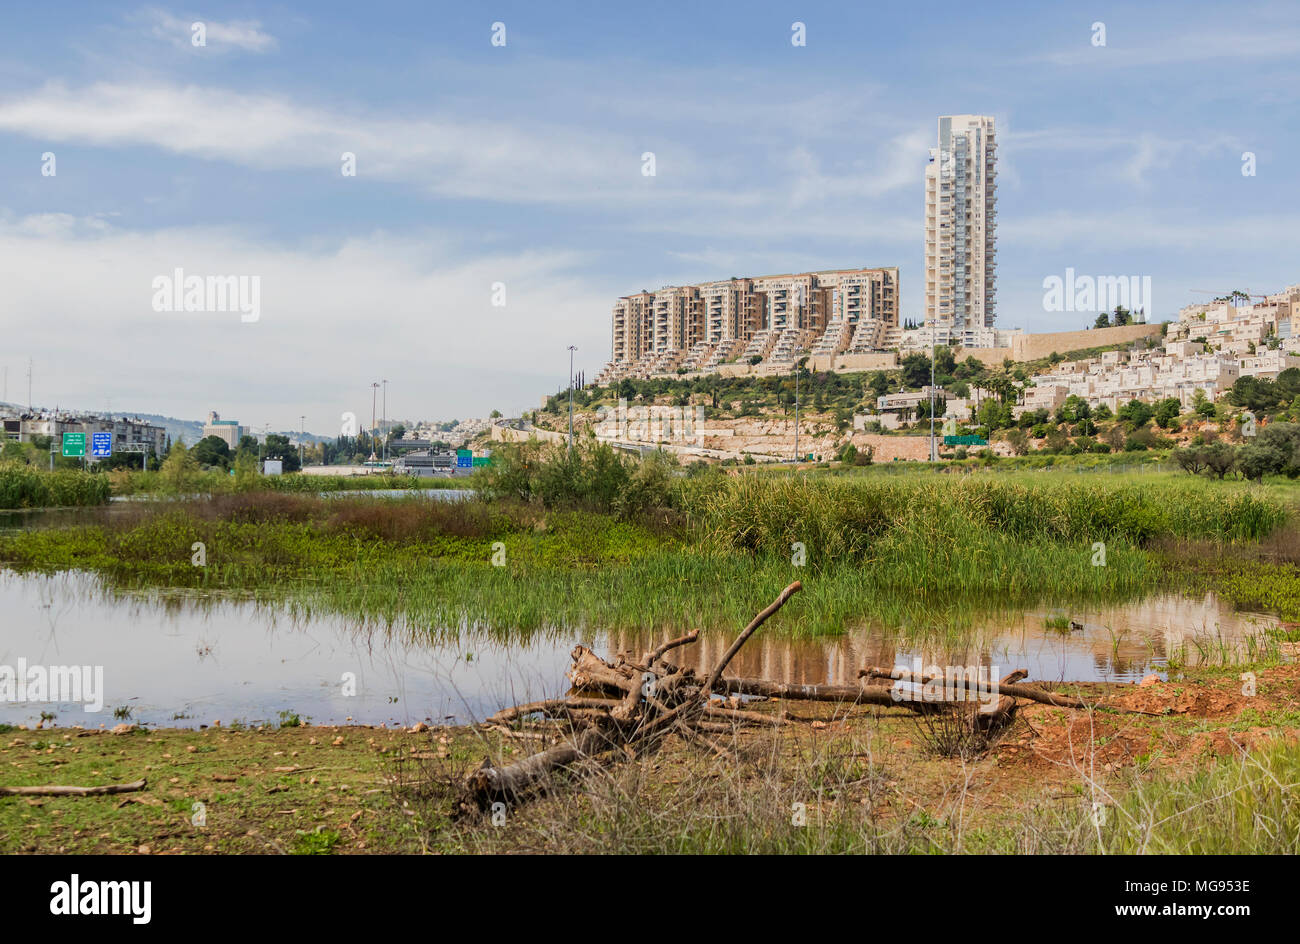 Urban nature: A natural pool of water amidst the buildings of Jerusalem, Israel Stock Photo